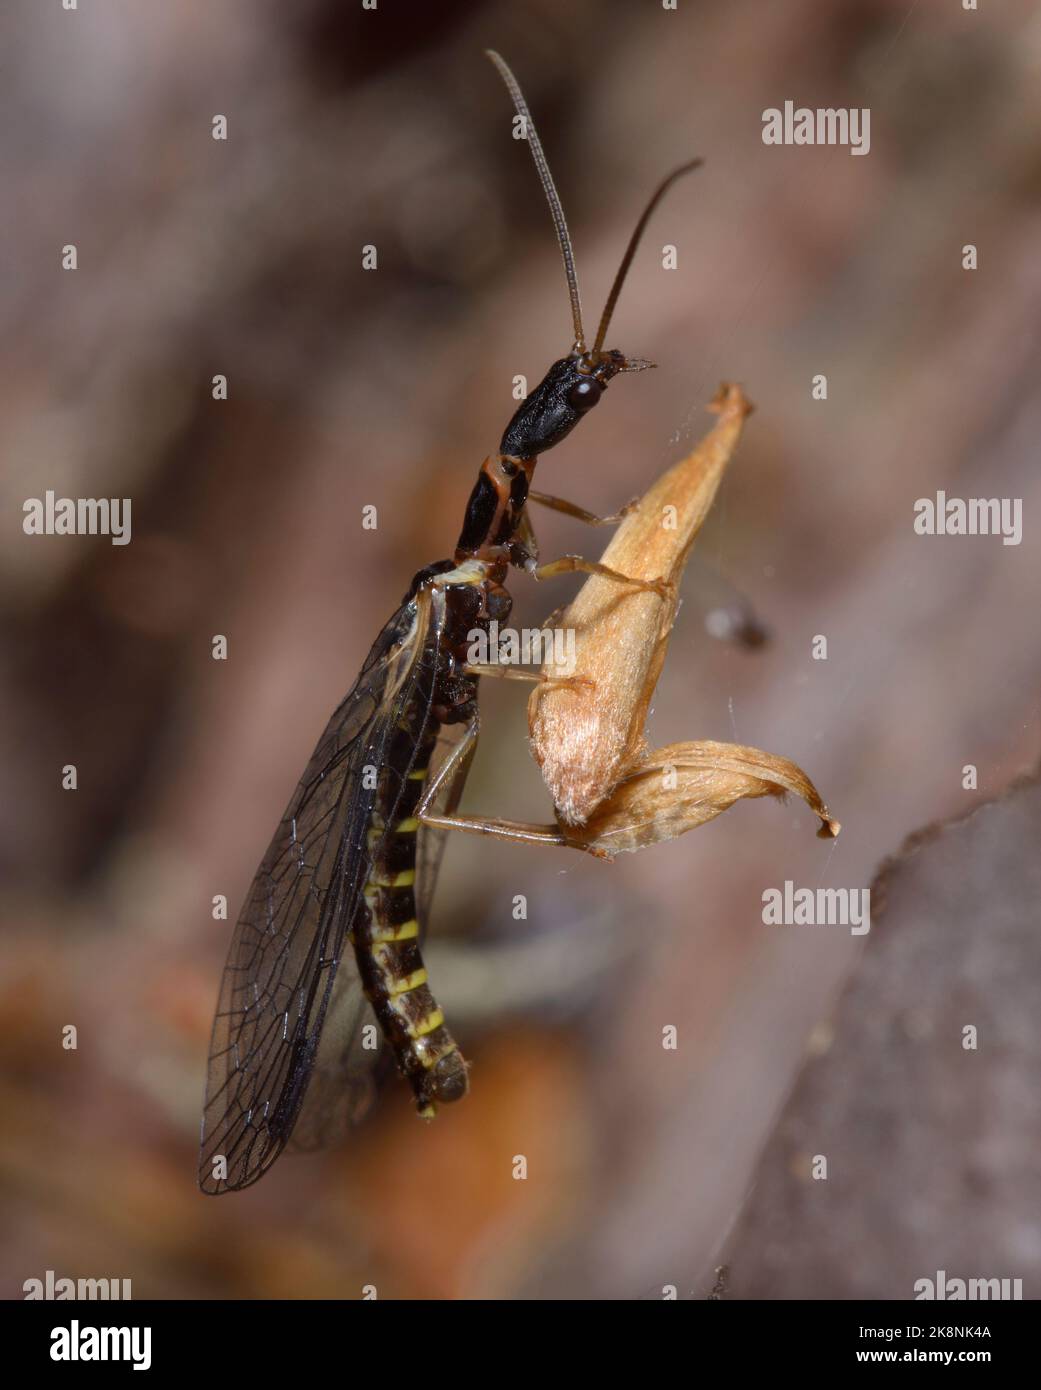 A snakefly, Raphidioptera, sitting on a piece of yellow leaf in front of brown blurred background Stock Photo